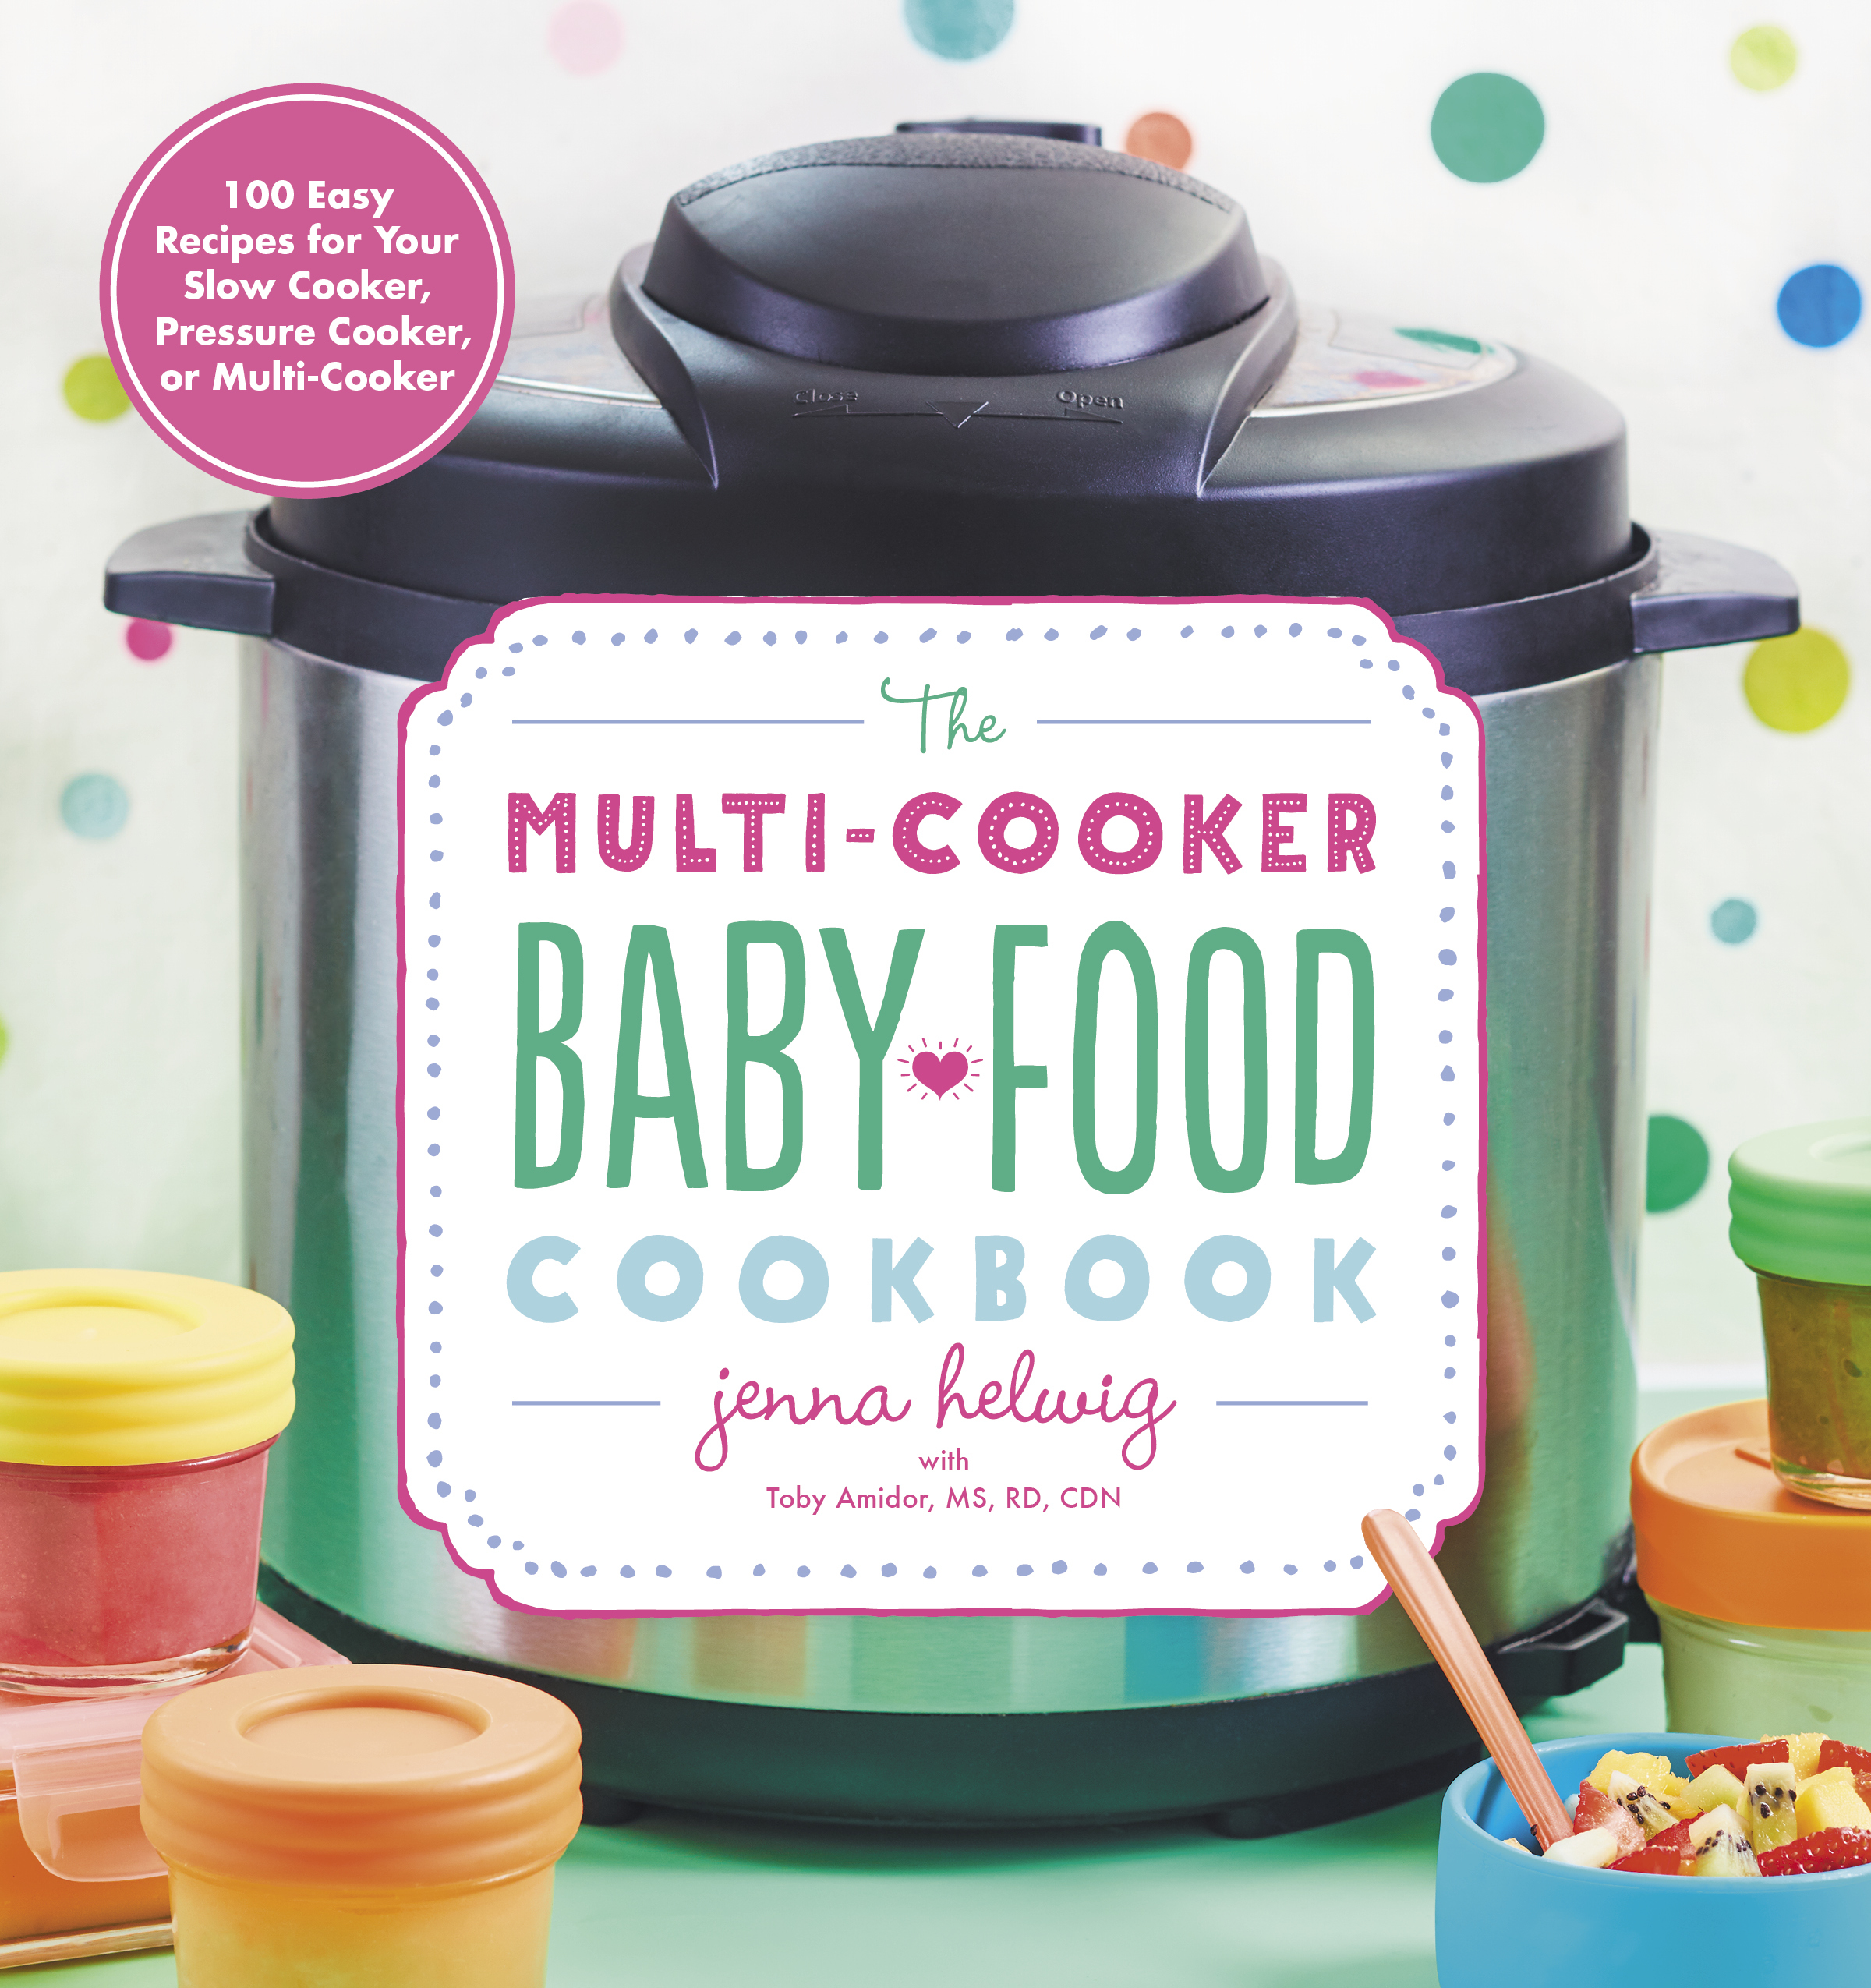 Baby Slow Cooker - Meals for One or Two